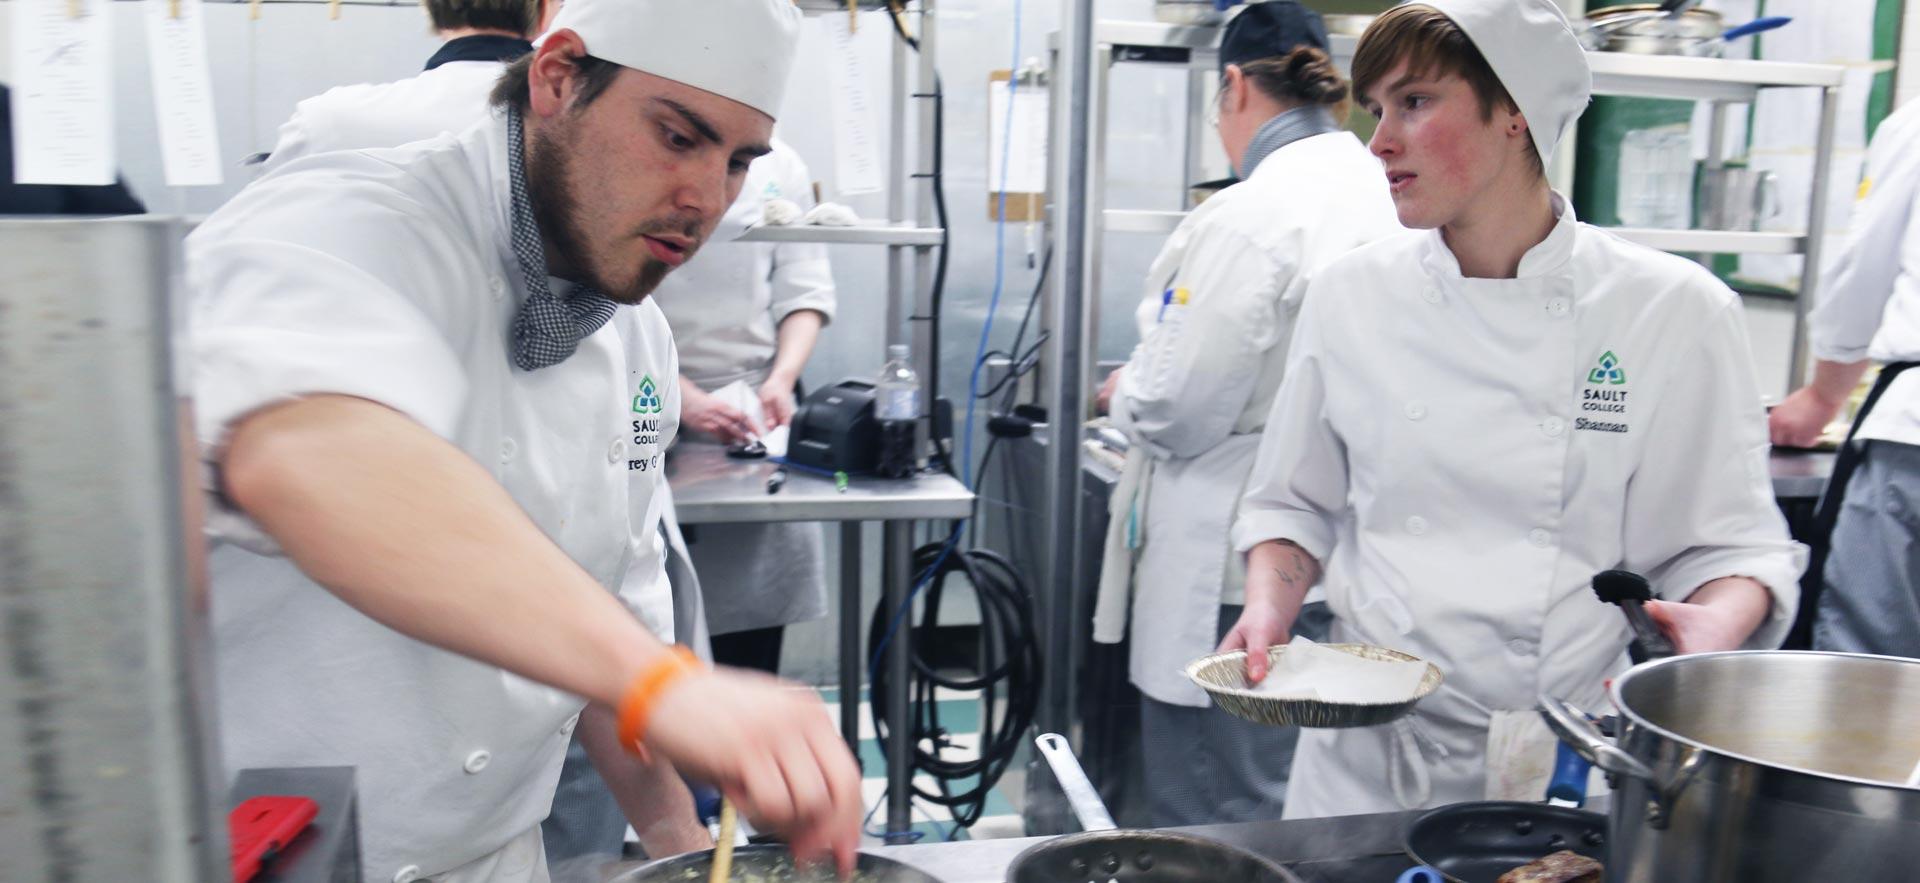 Busy culinary students work on an assignment in one of the о culinary kitchens.